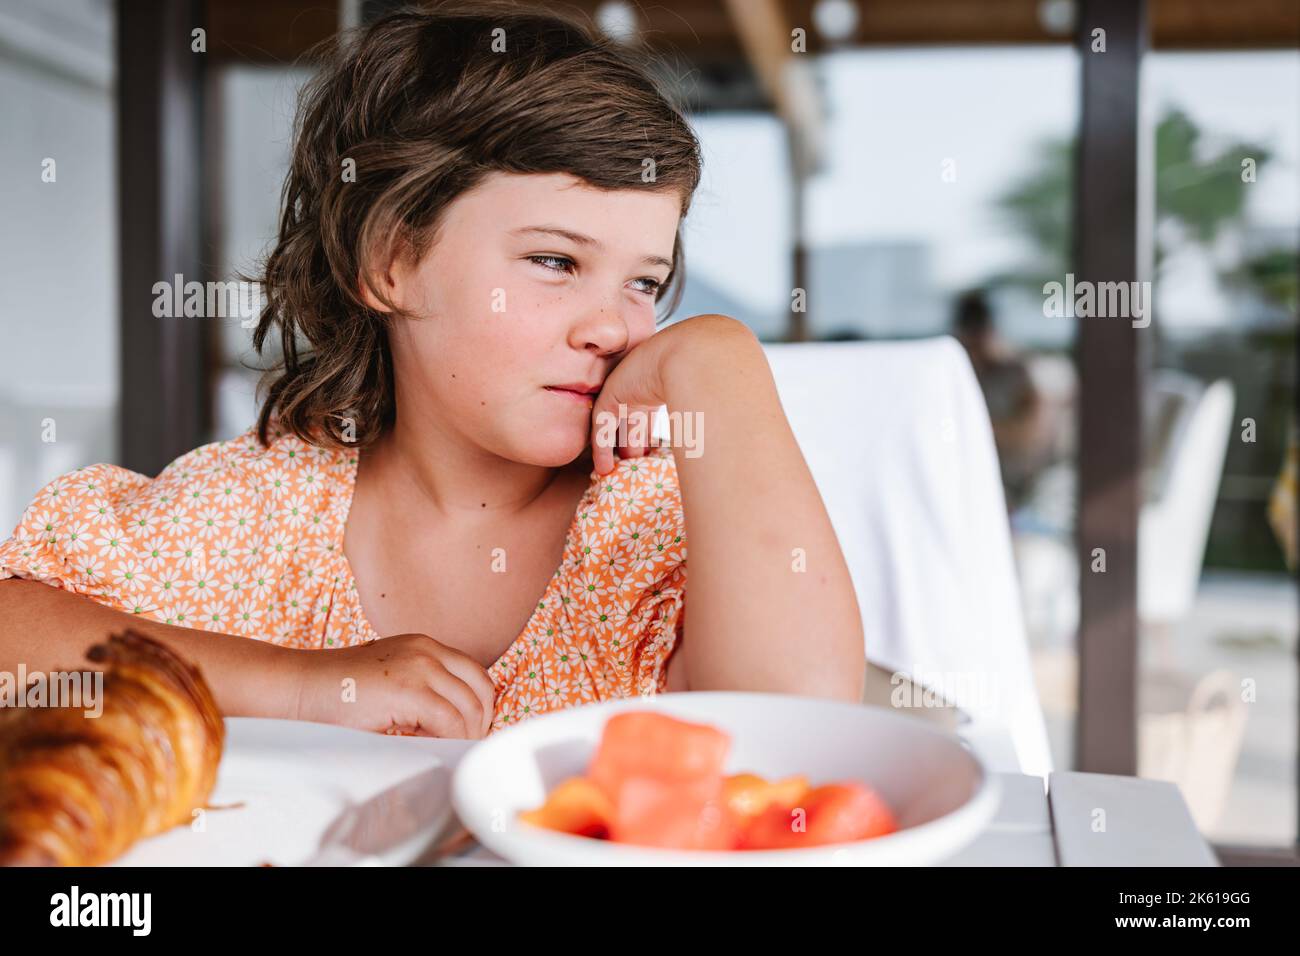 Wistful child with brown hair sitting at table with plates of delicious food in cafeteria and looking away Stock Photo